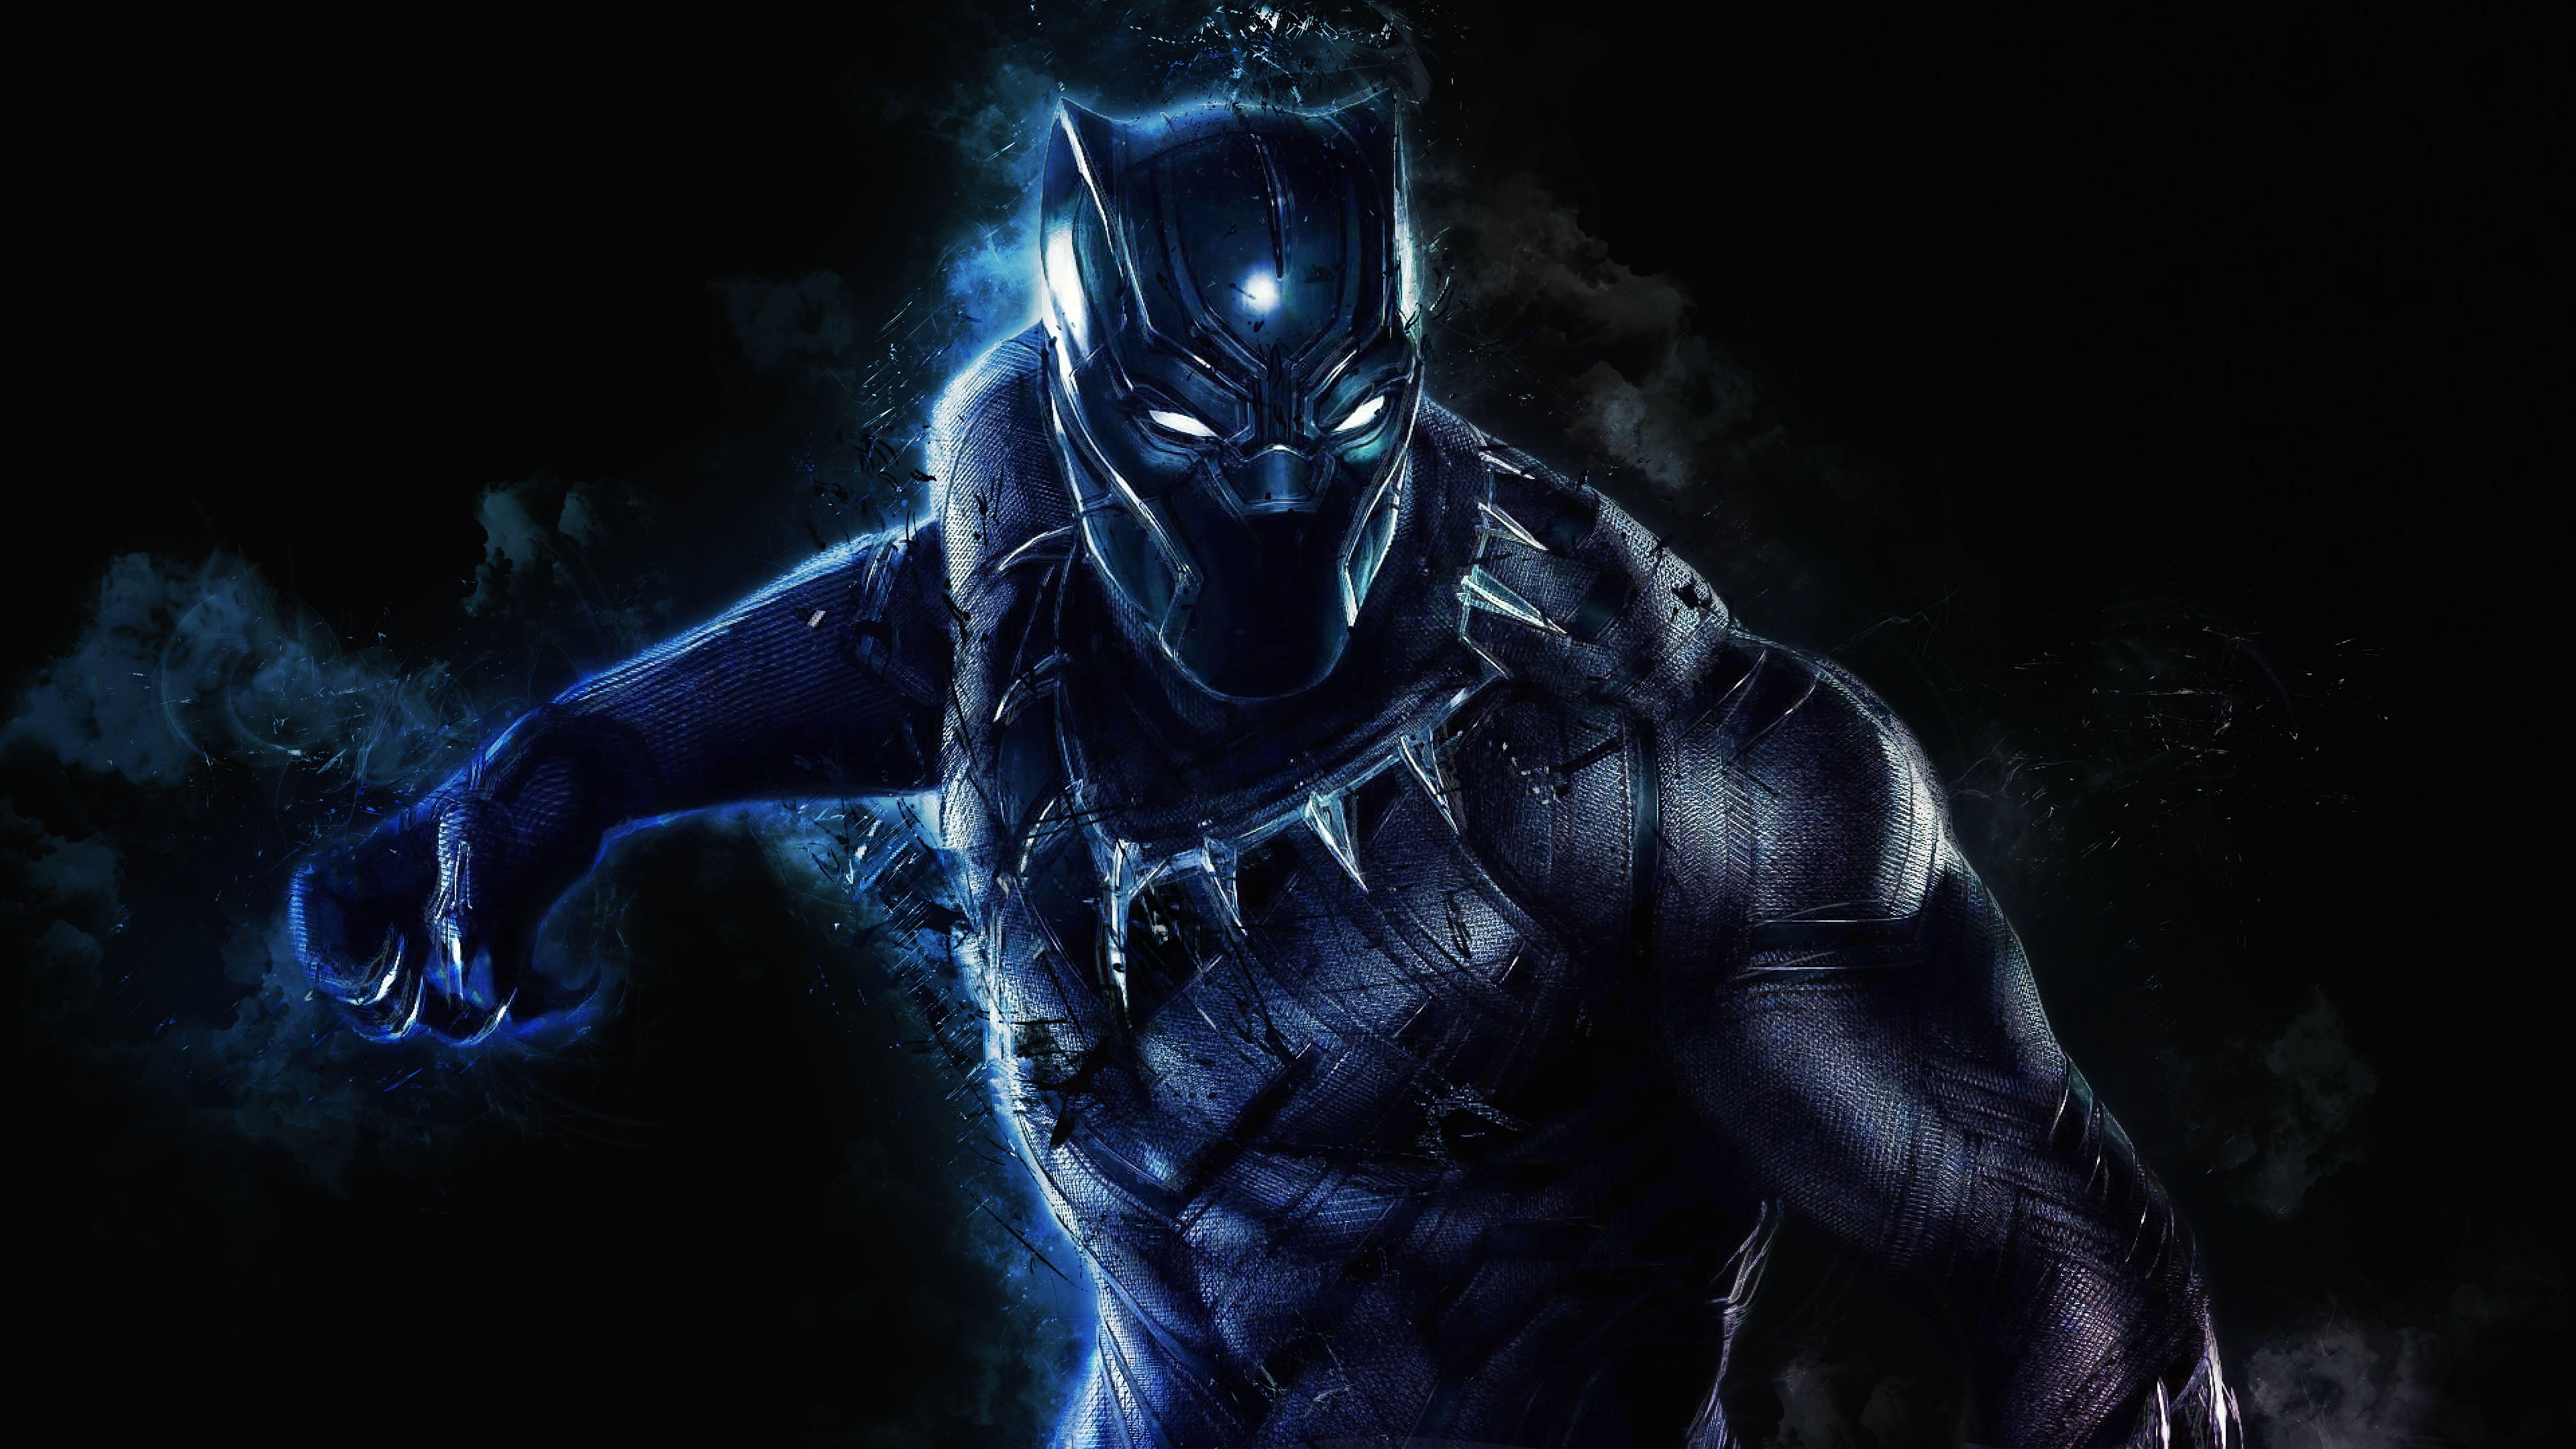 Cool Black Panther Wallpapers.